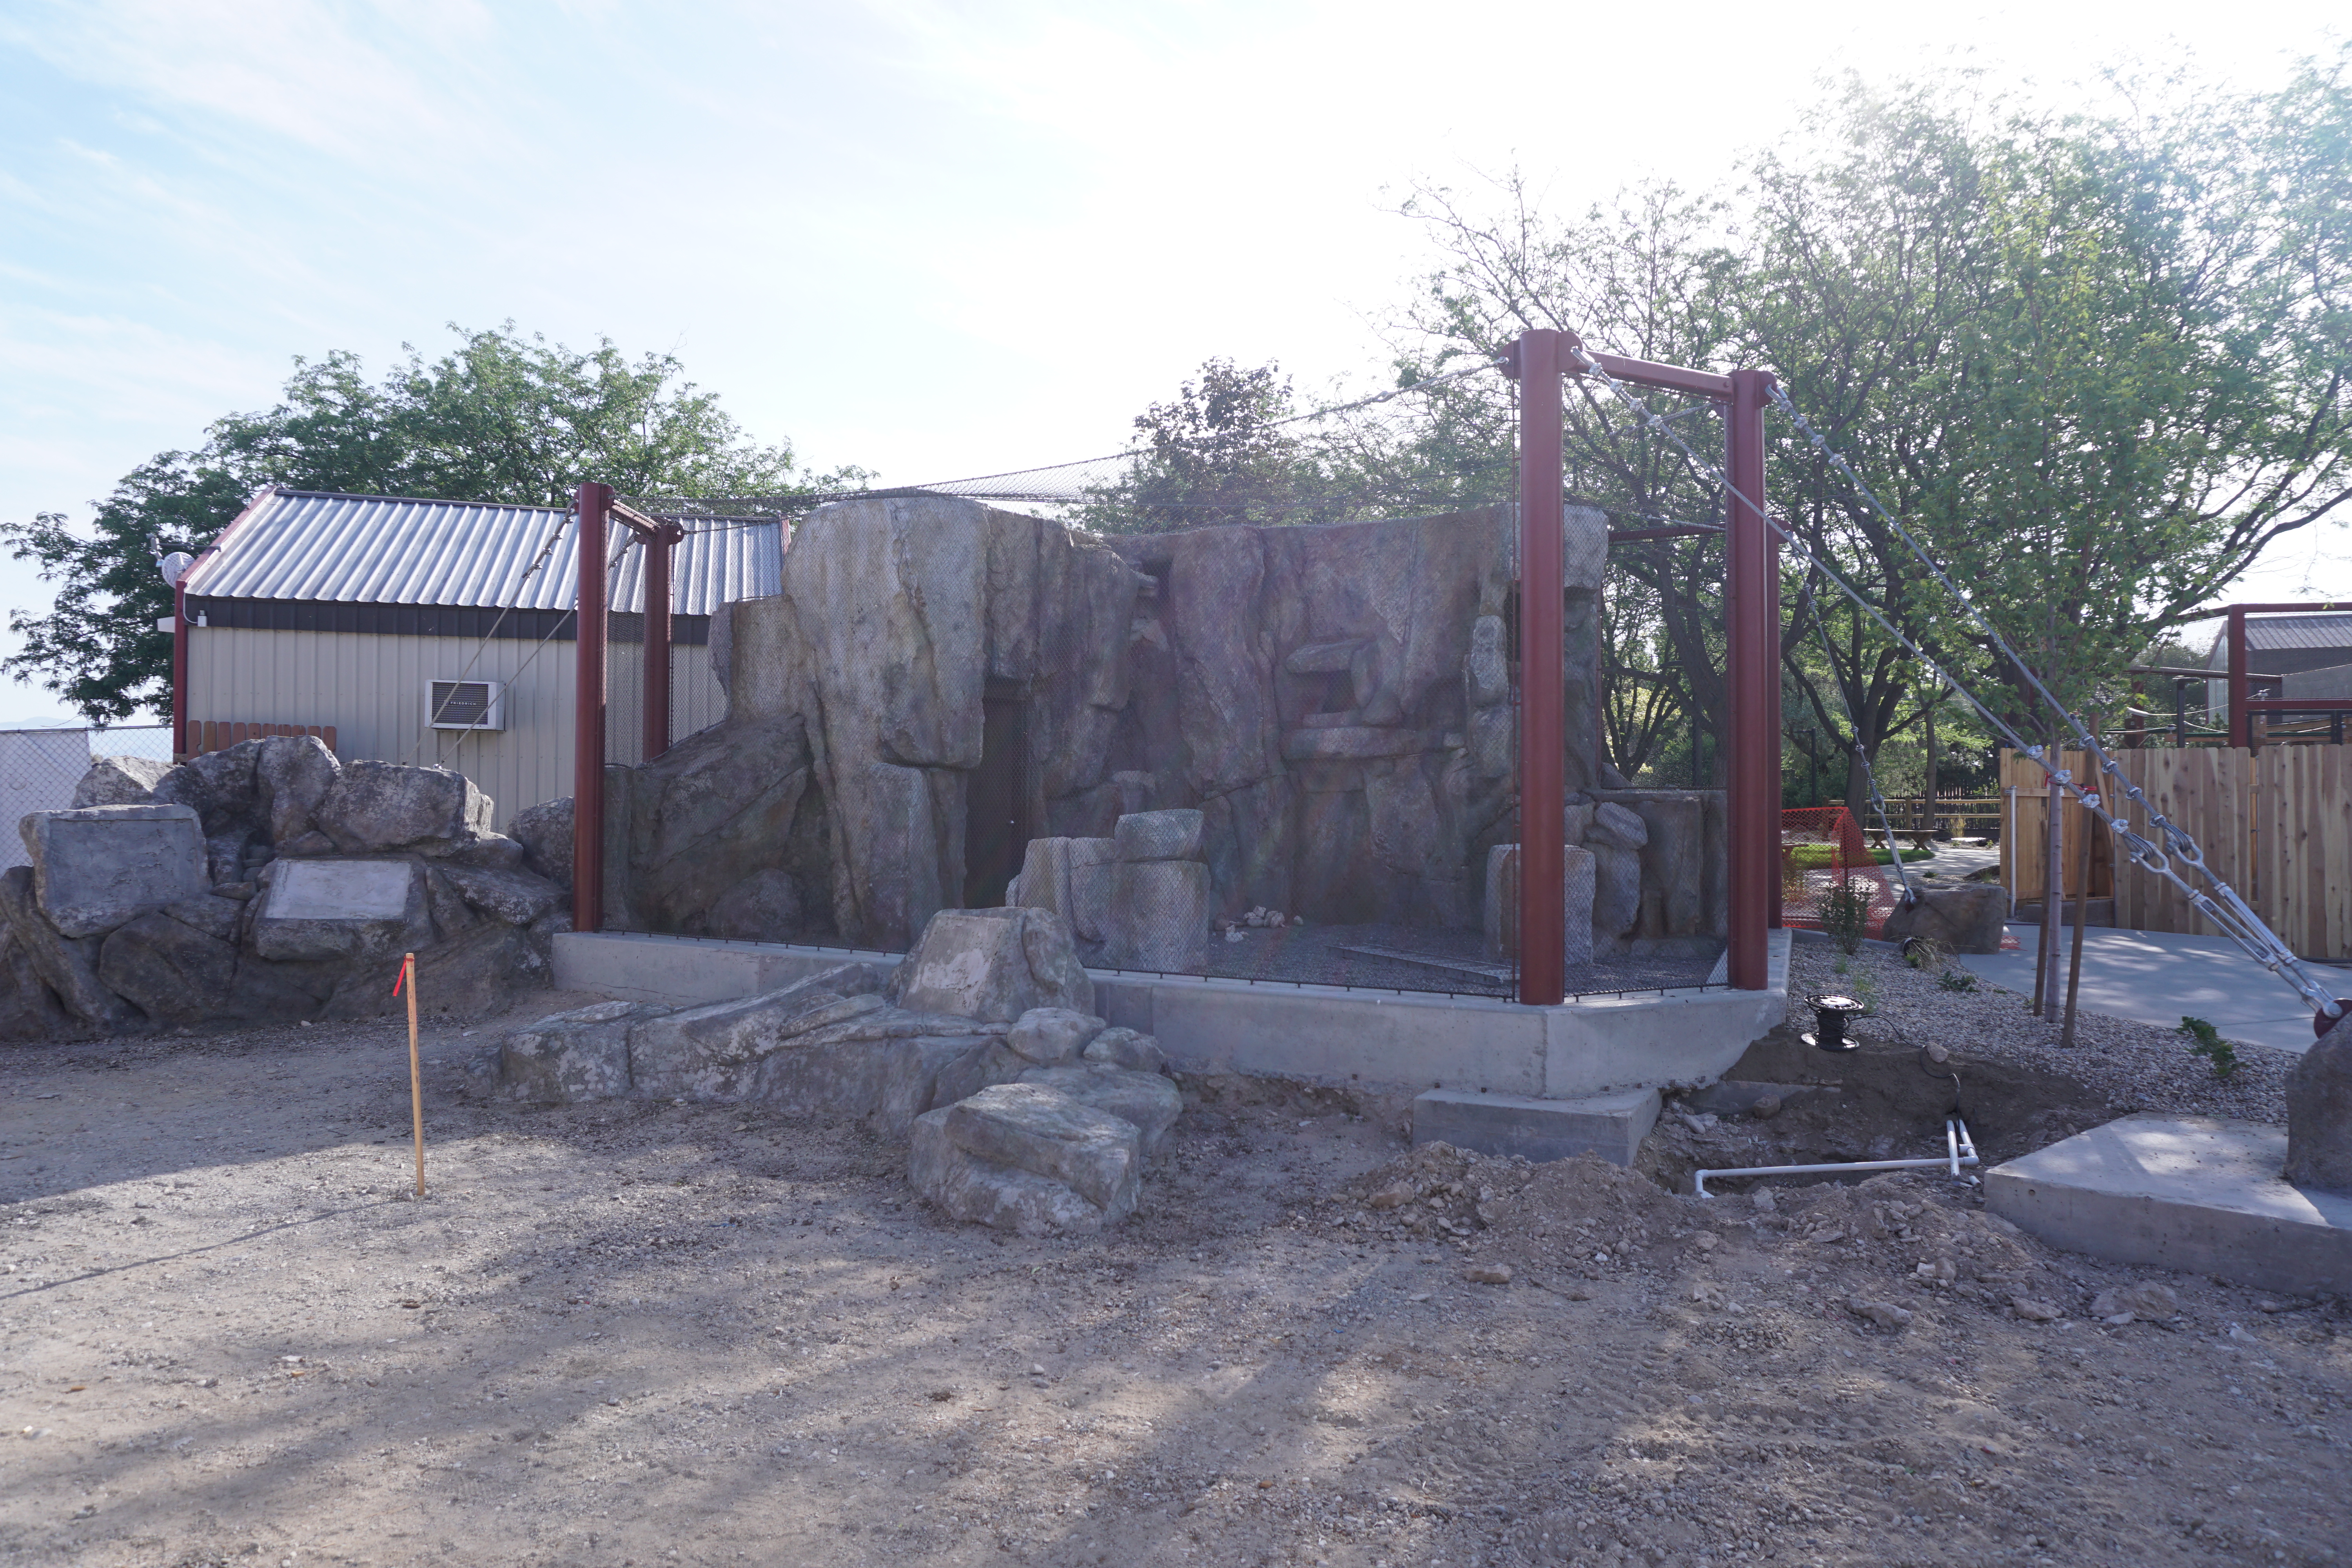 The new Peregrine Falcon exhibit is finished and awaiting completion of other parts of the project so that a bird can be introduced.